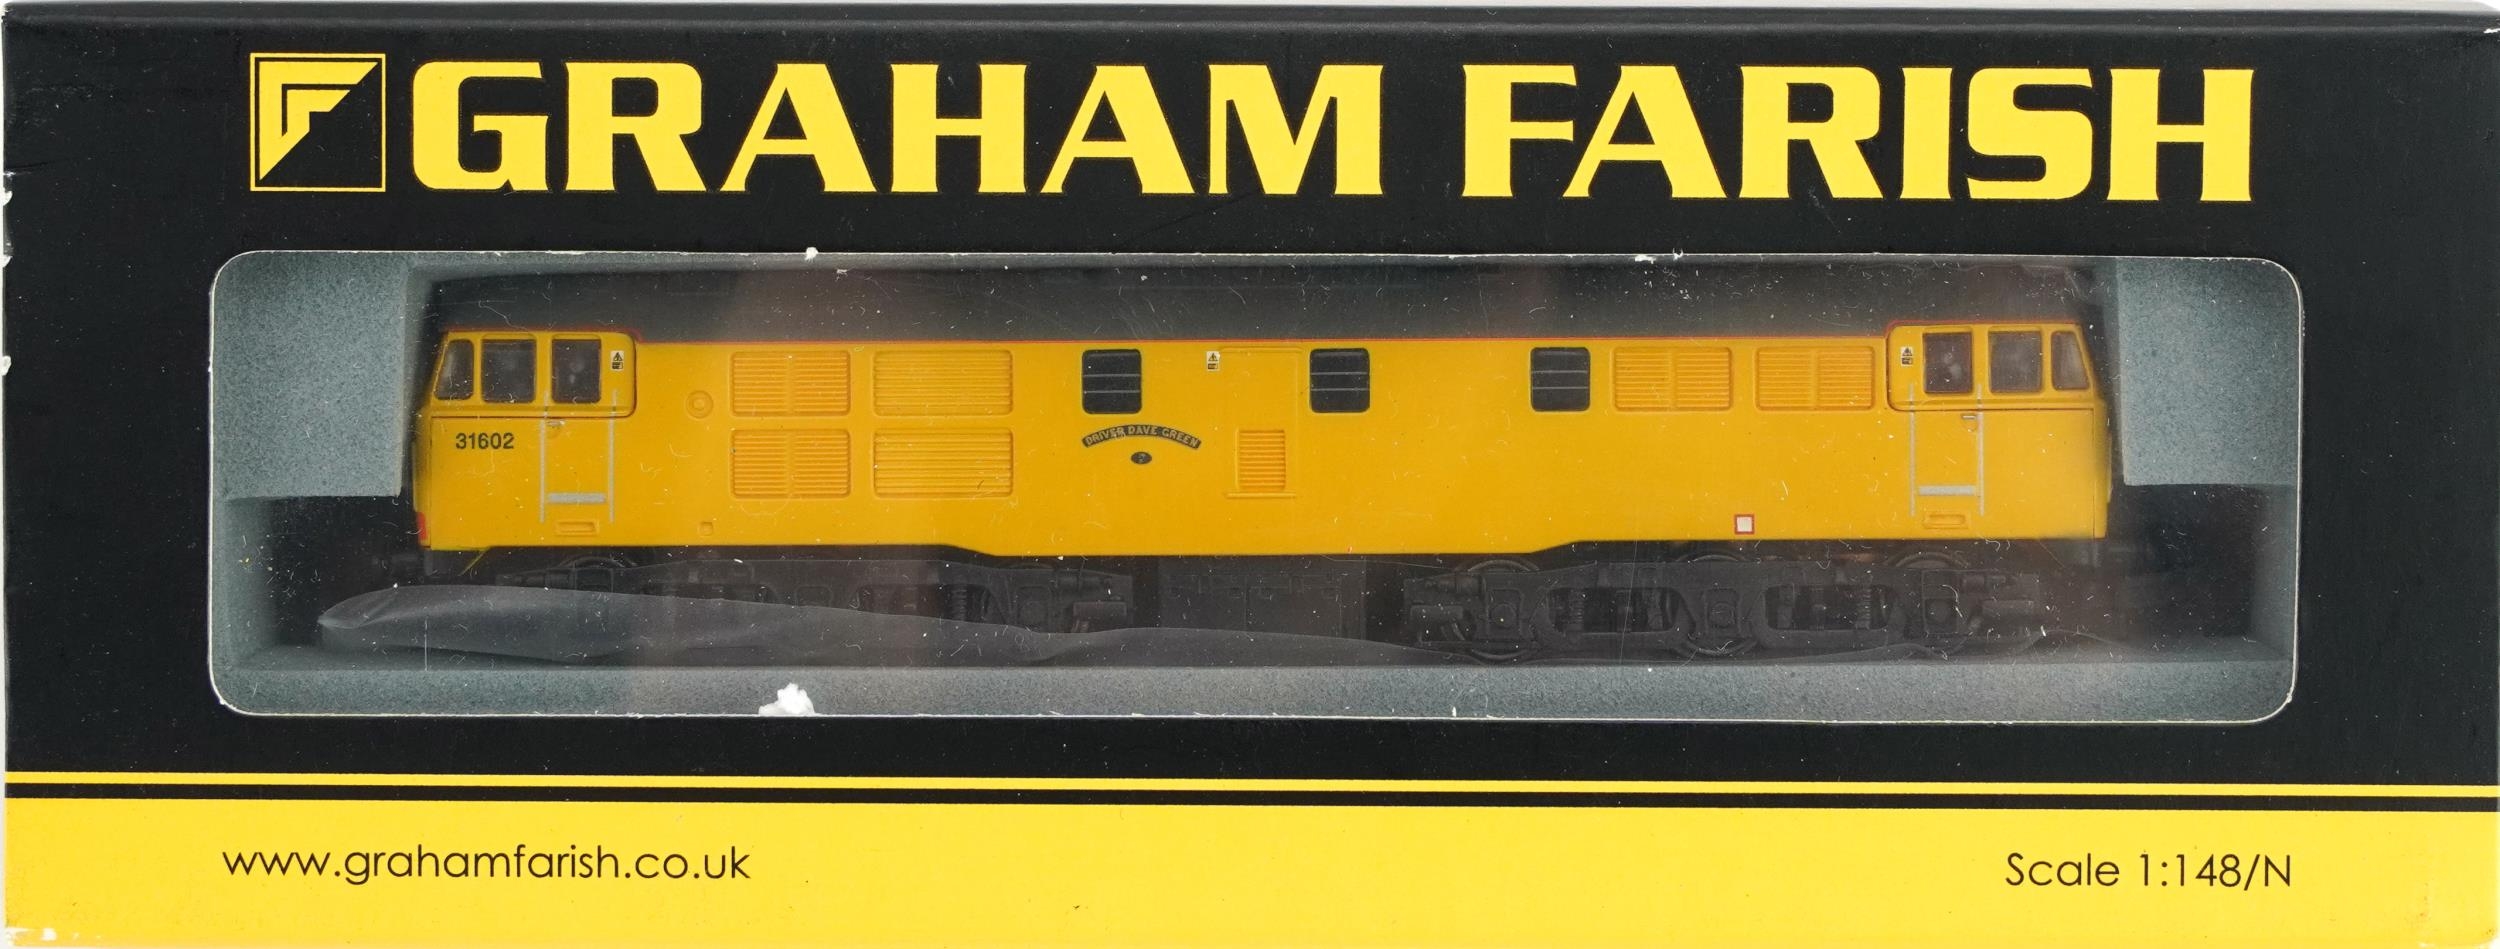 Two Graham Farish N gauge model railway locomotives with cases, numbers 371-105 and 371-130 - Image 2 of 3